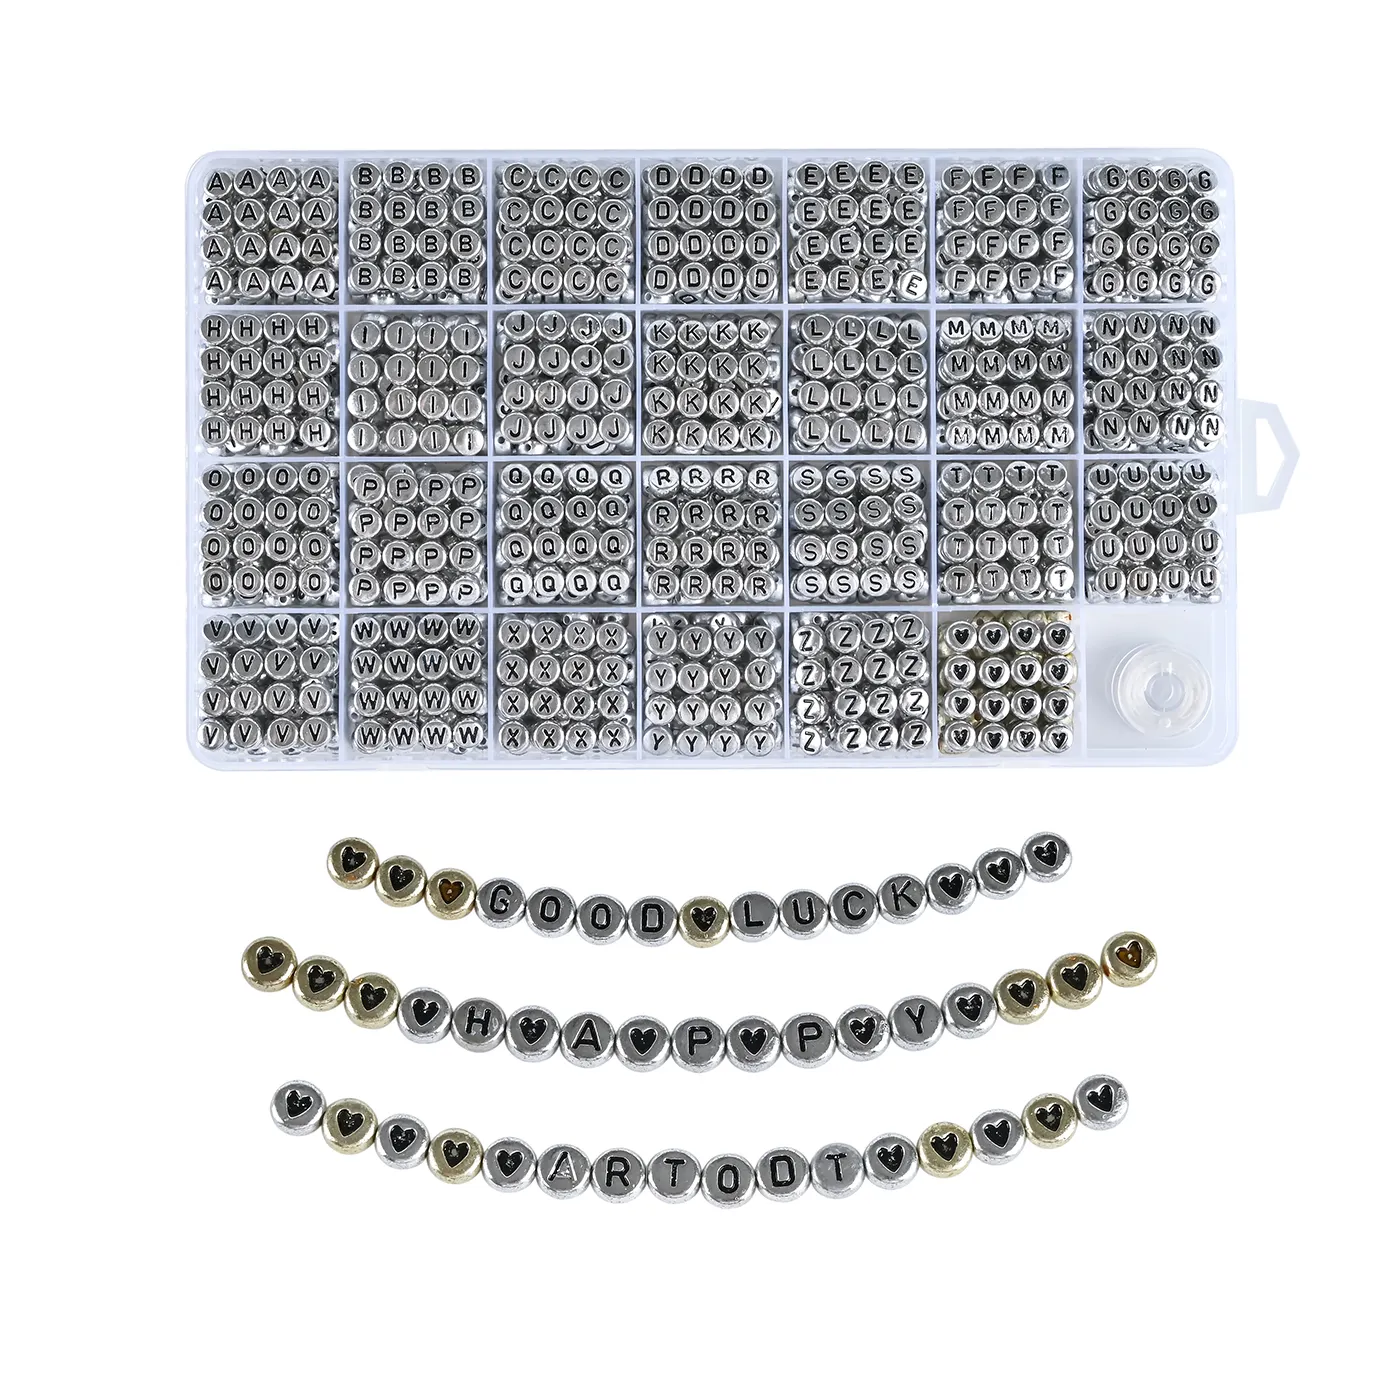 Wholesale high quality 4*7mm 28grid 1350pcs/box Acrylic Round Beads various styles colour beads for jewelry making